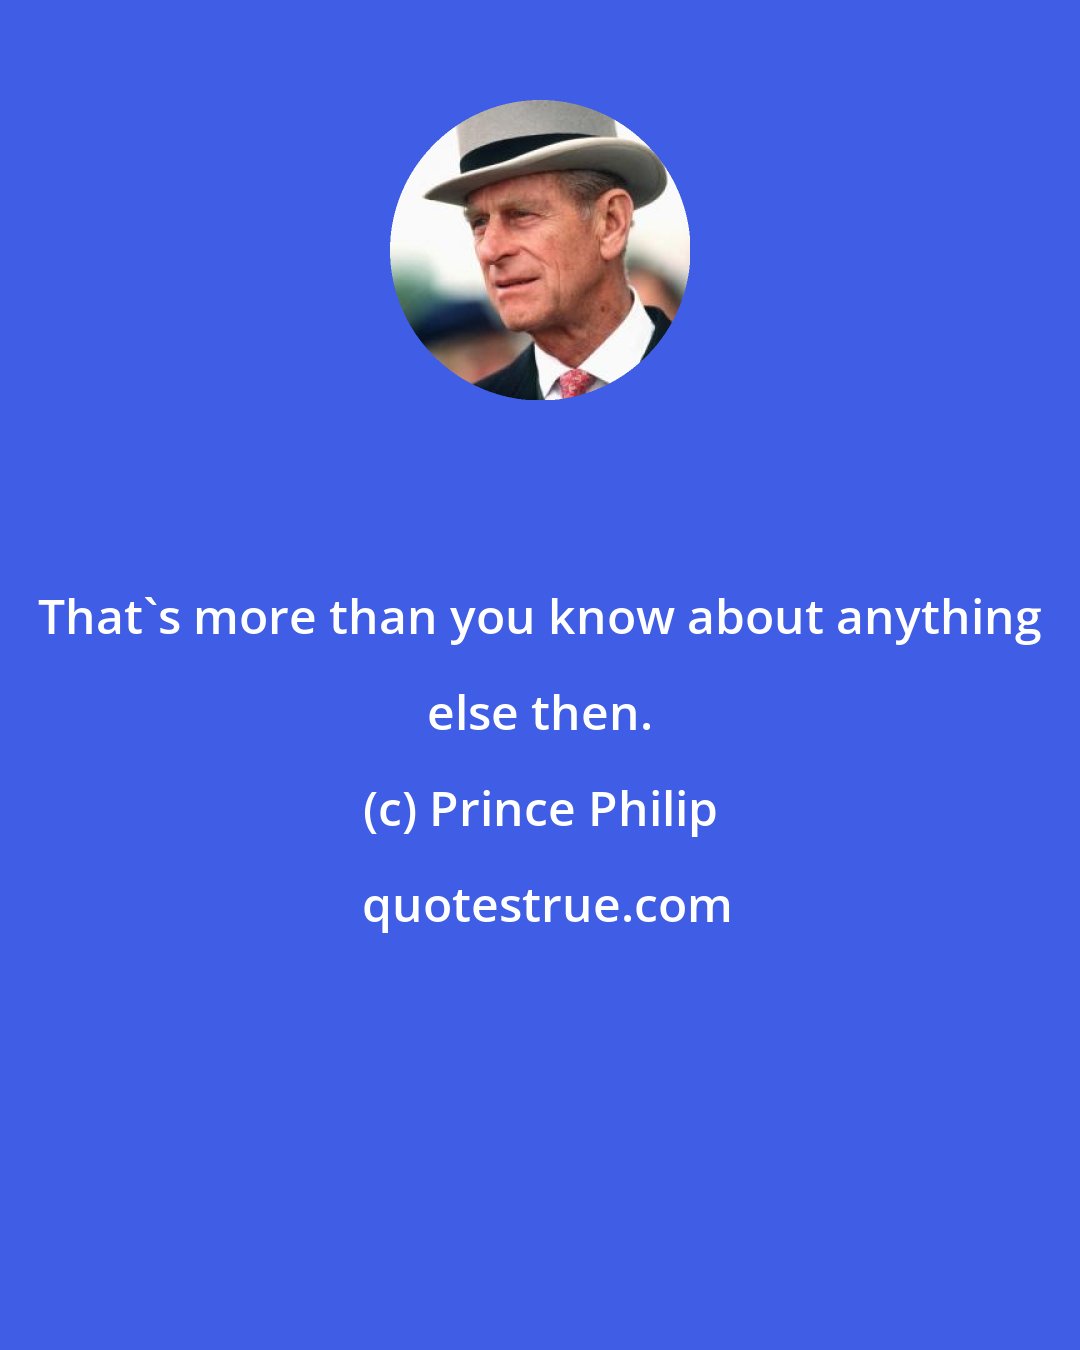 Prince Philip: That's more than you know about anything else then.